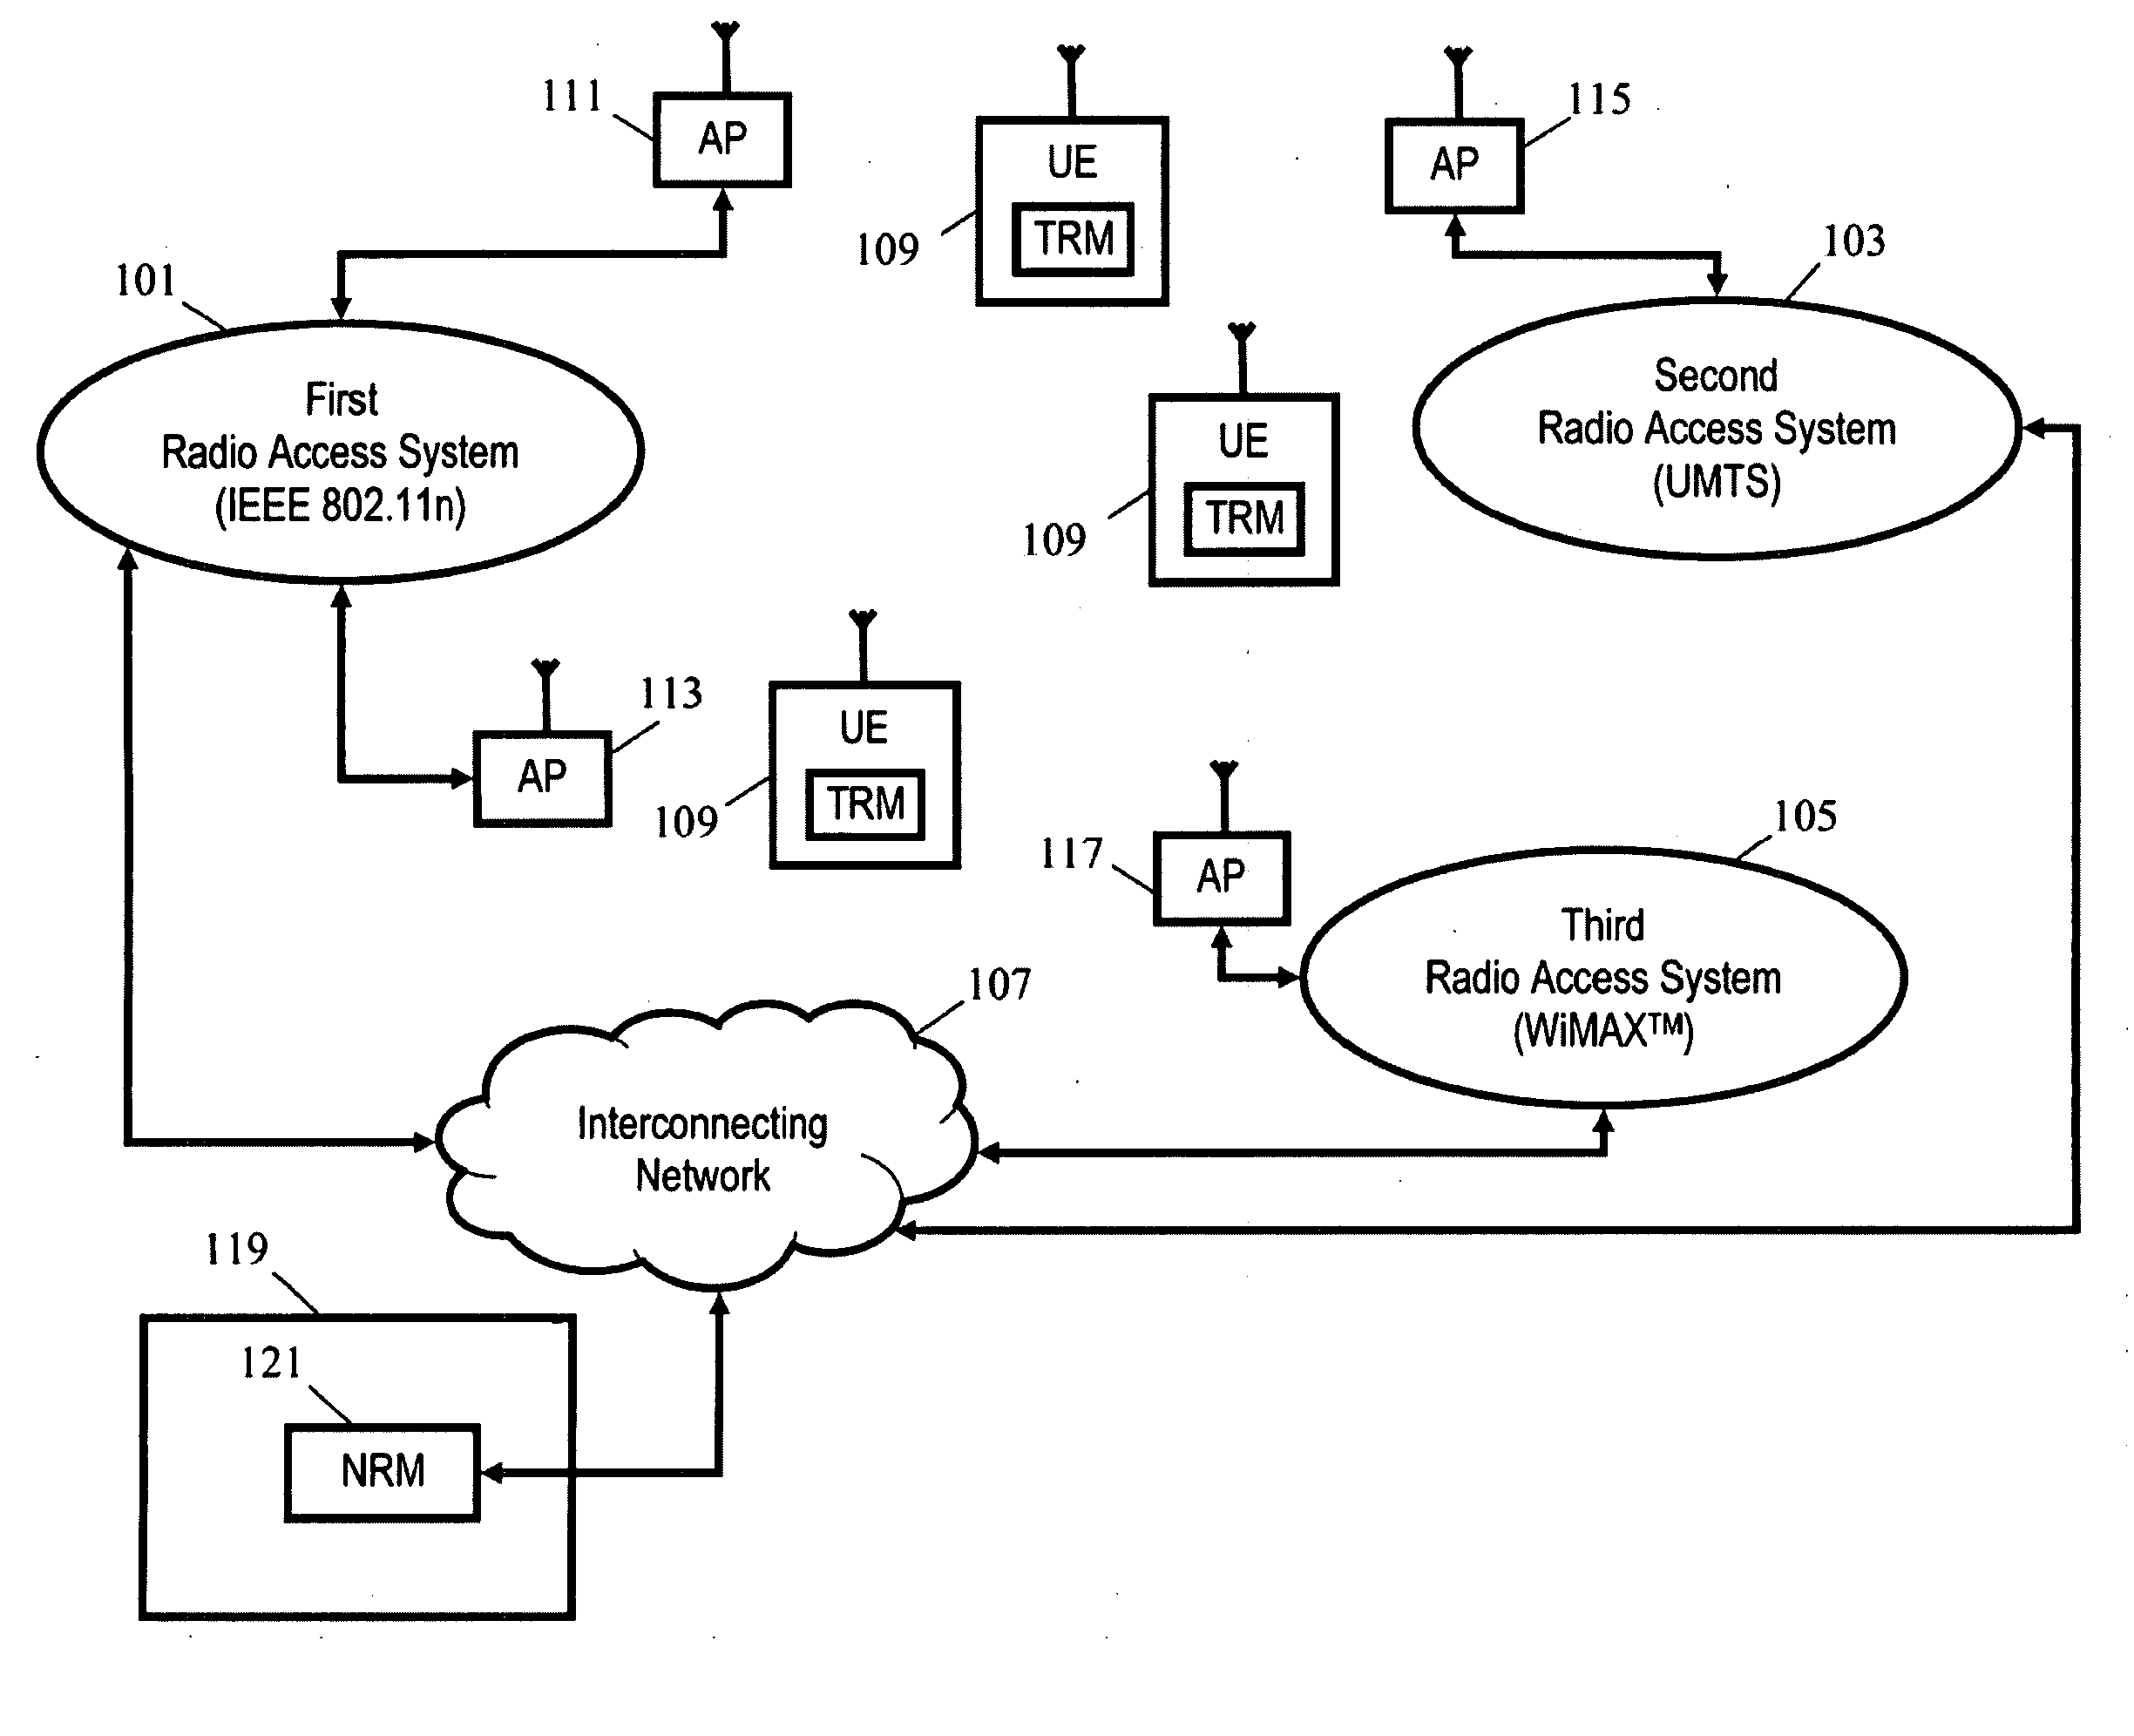 Optimization in a communication system